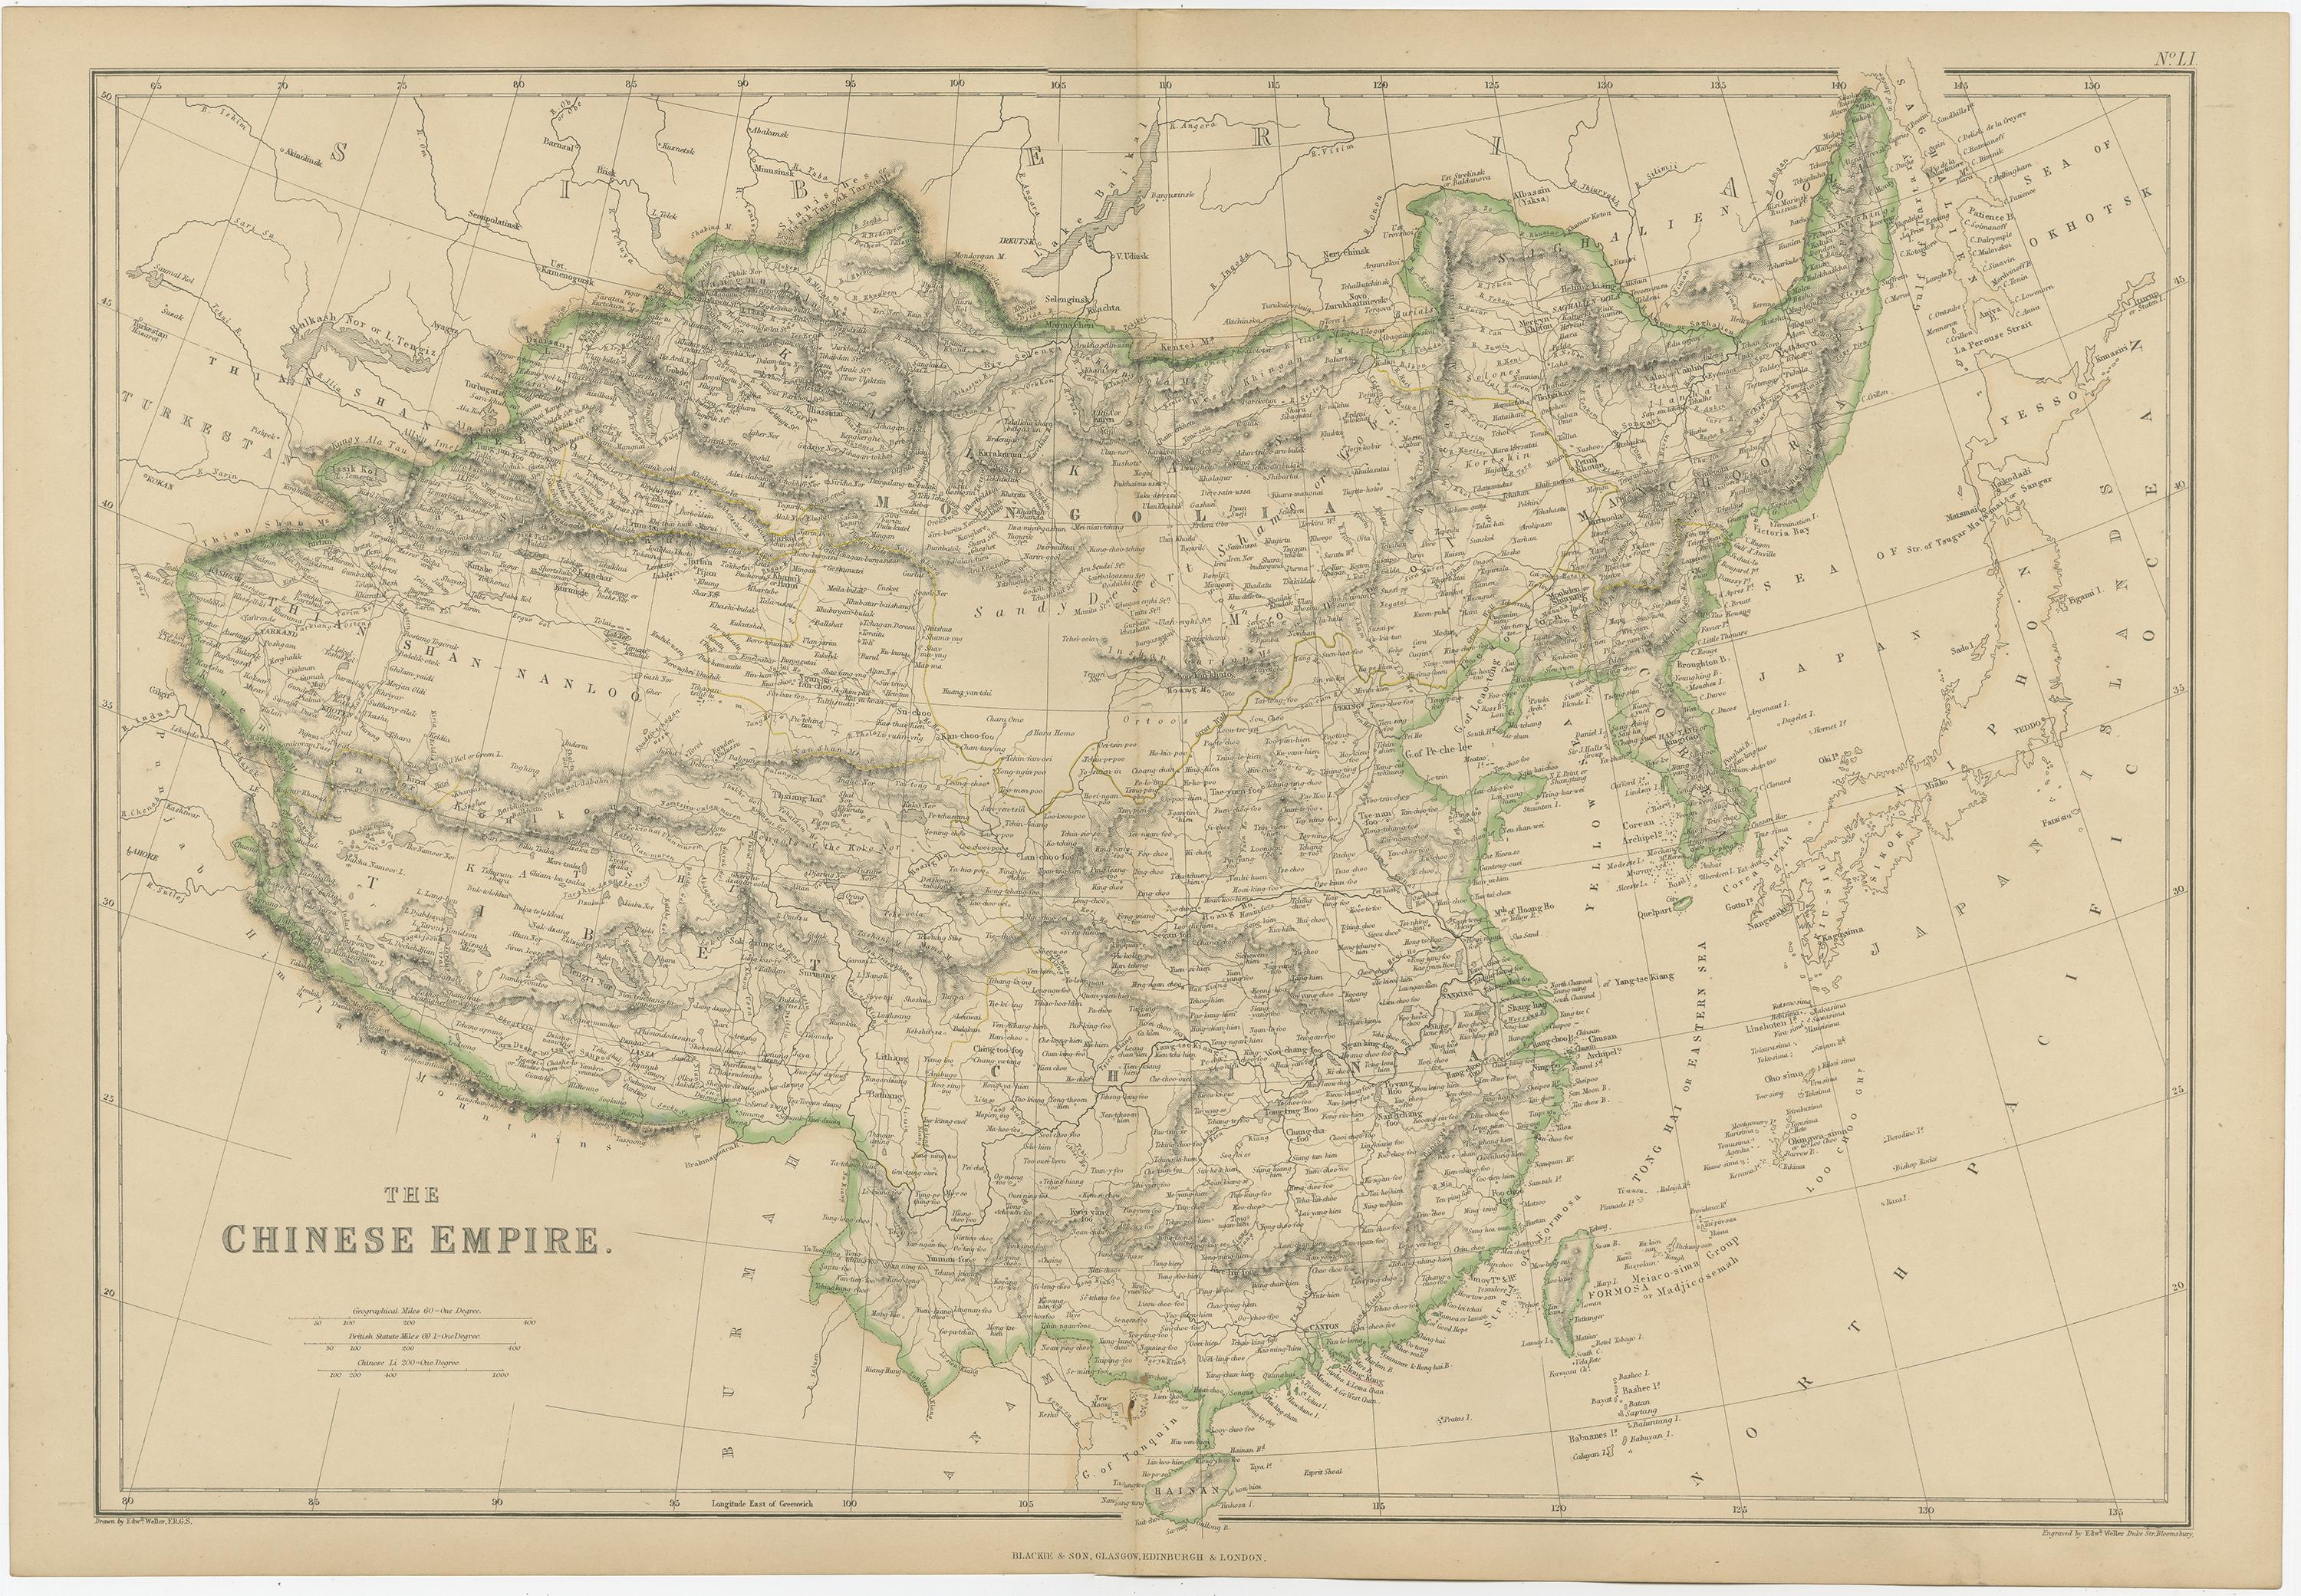 Antique map titled 'The Chinese Empire'. Original antique map of the Chinese Empire. This map originates from ‘The Imperial Atlas of Modern Geography’. Published by W. G. Blackie, 1859.